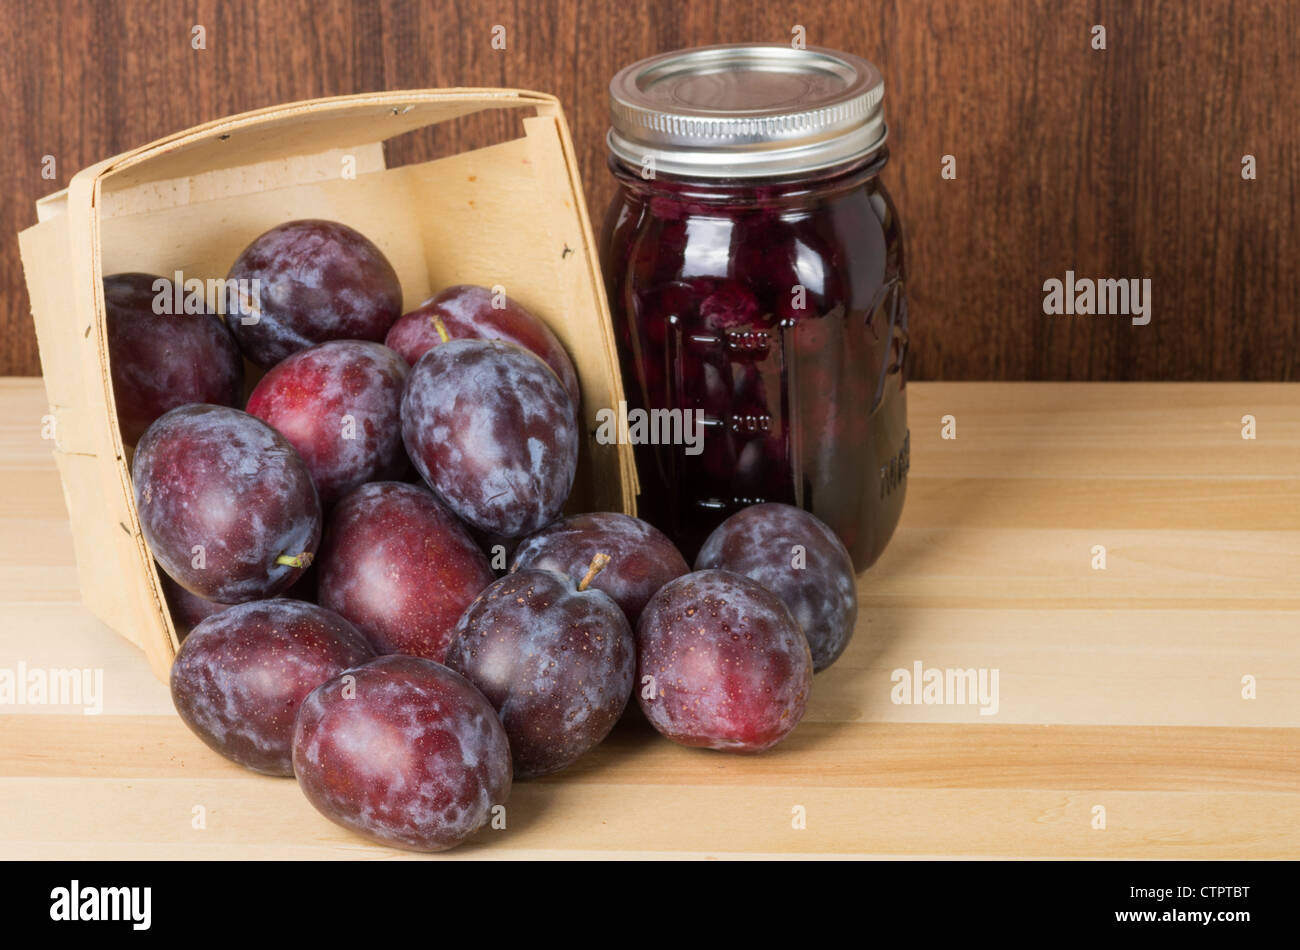 Prune plums in wooden container with a jar of plum jam or jelly Stock Photo